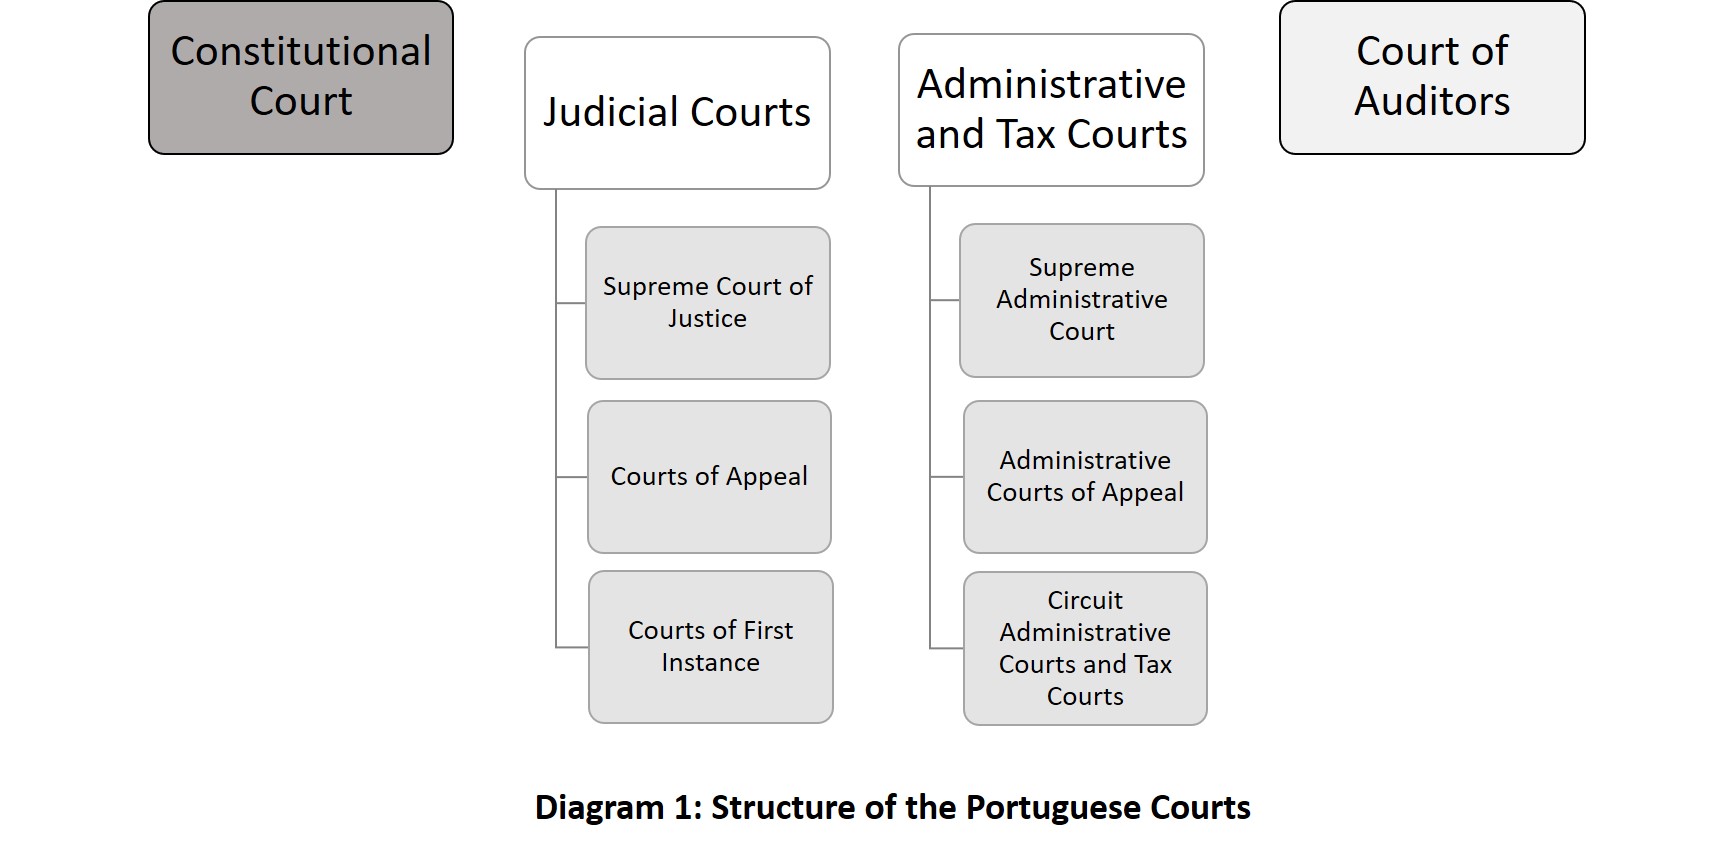 Diagram 1: Structure of the Portuguese Courts